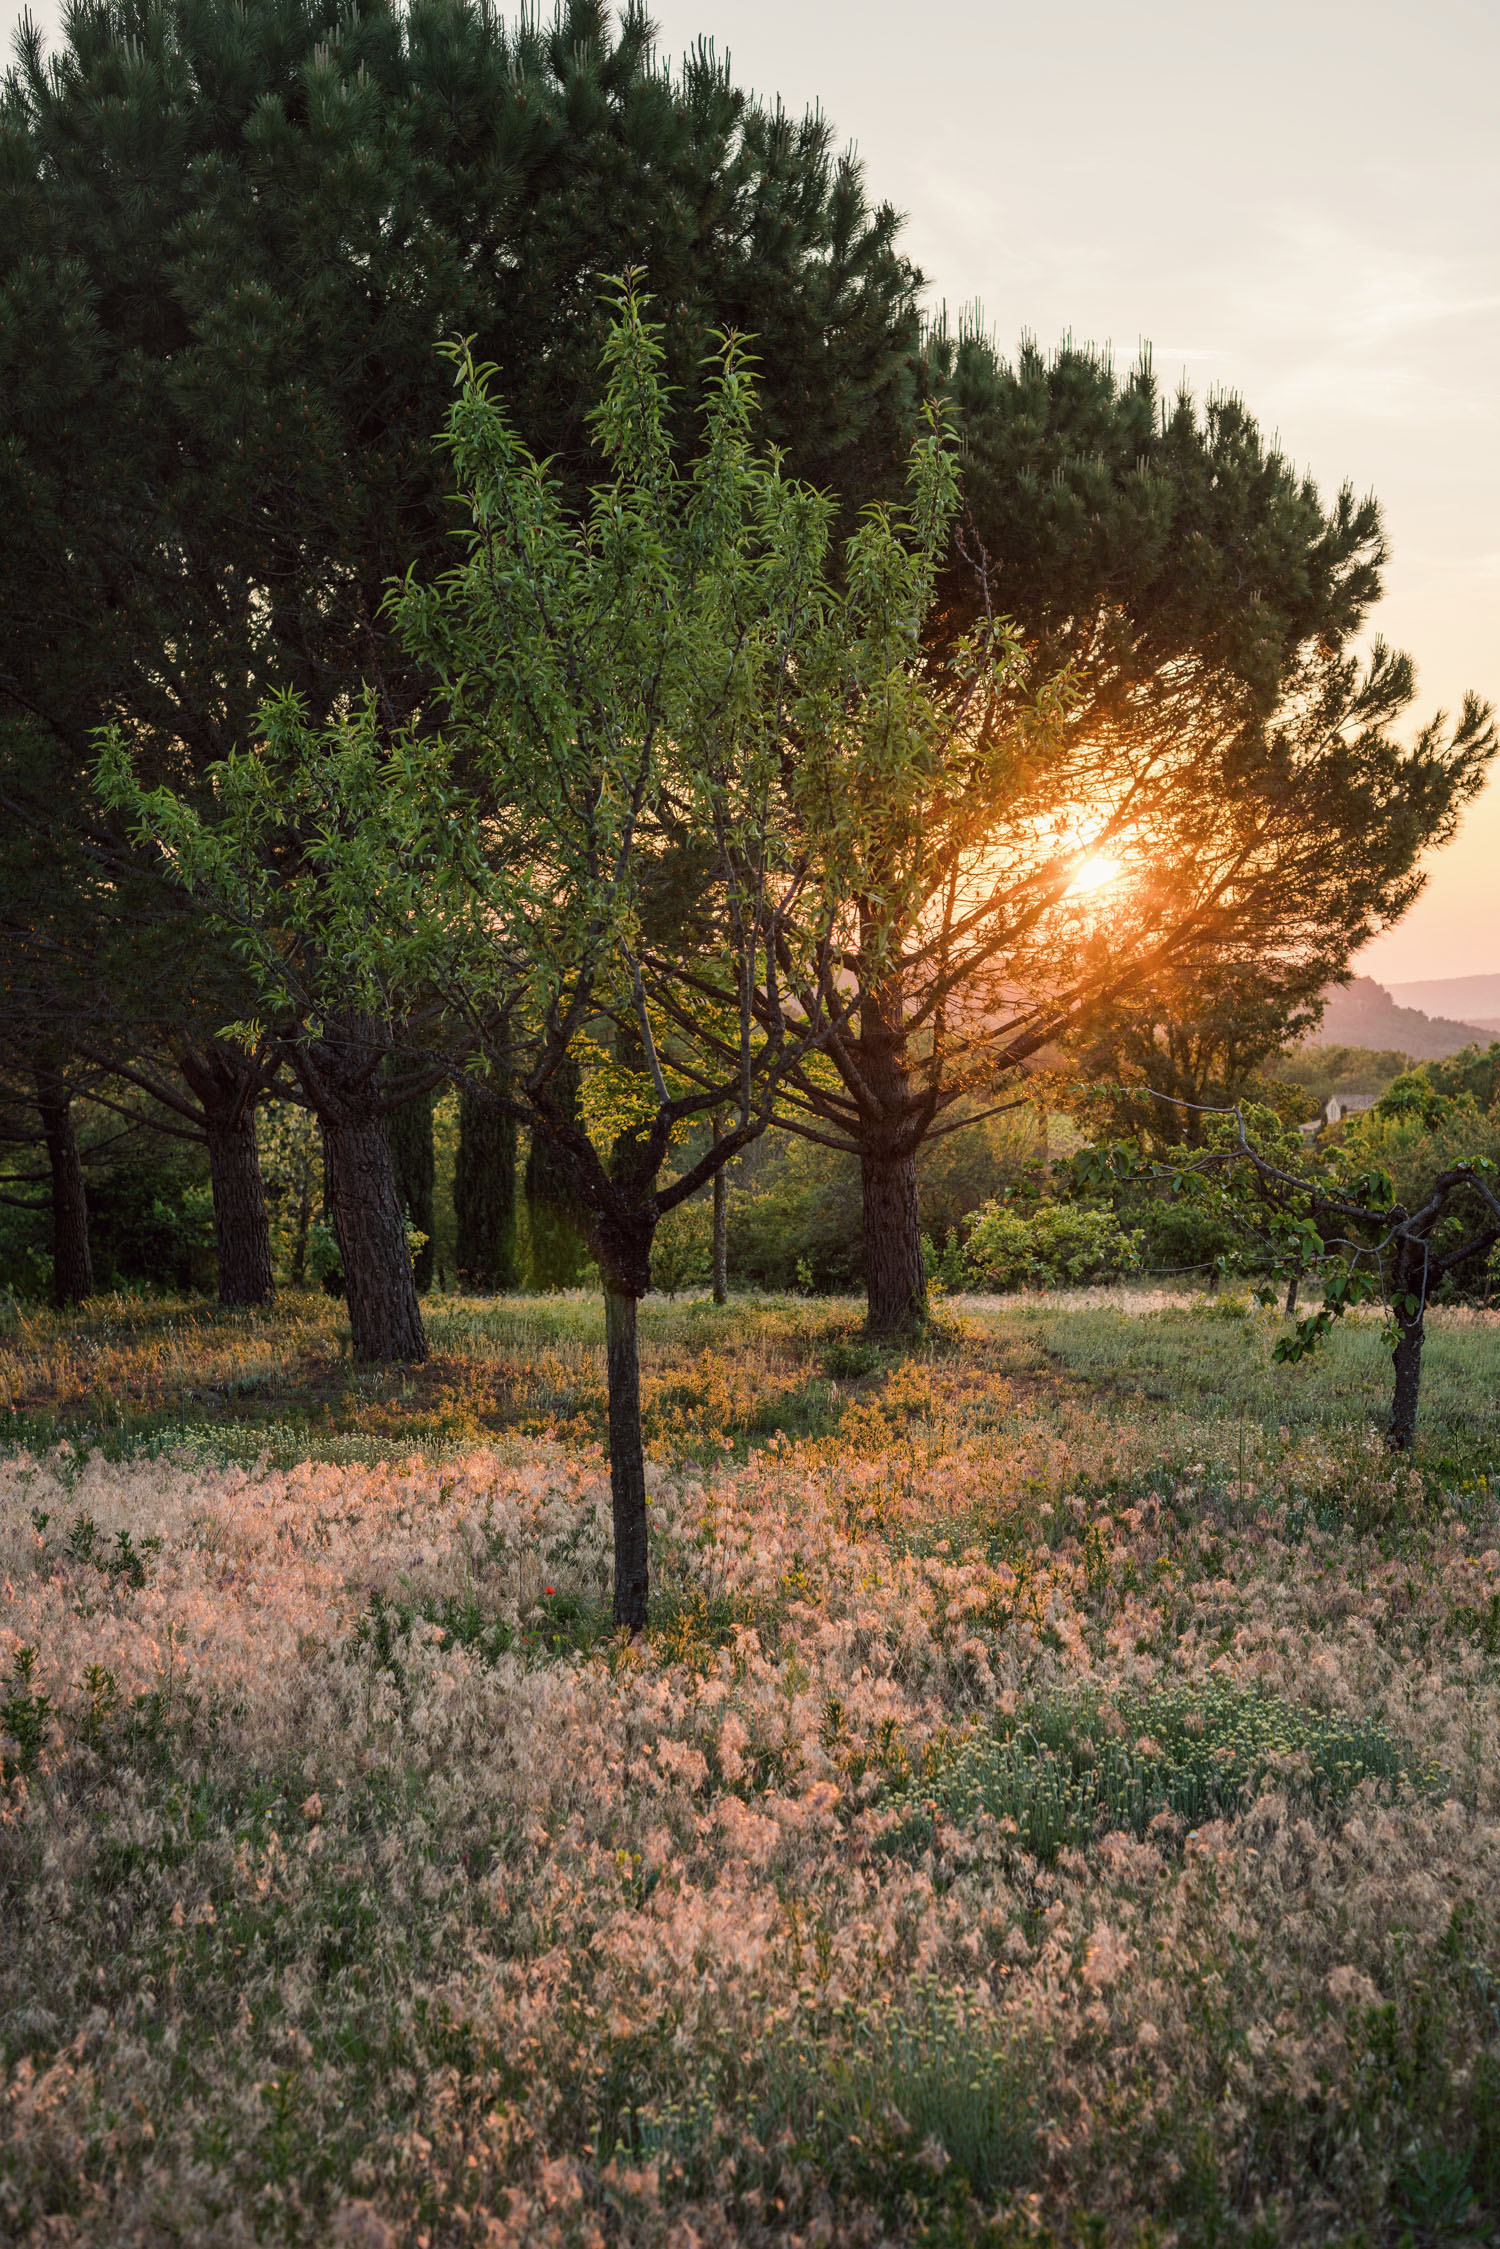 Snapshots from Provence in the South of France